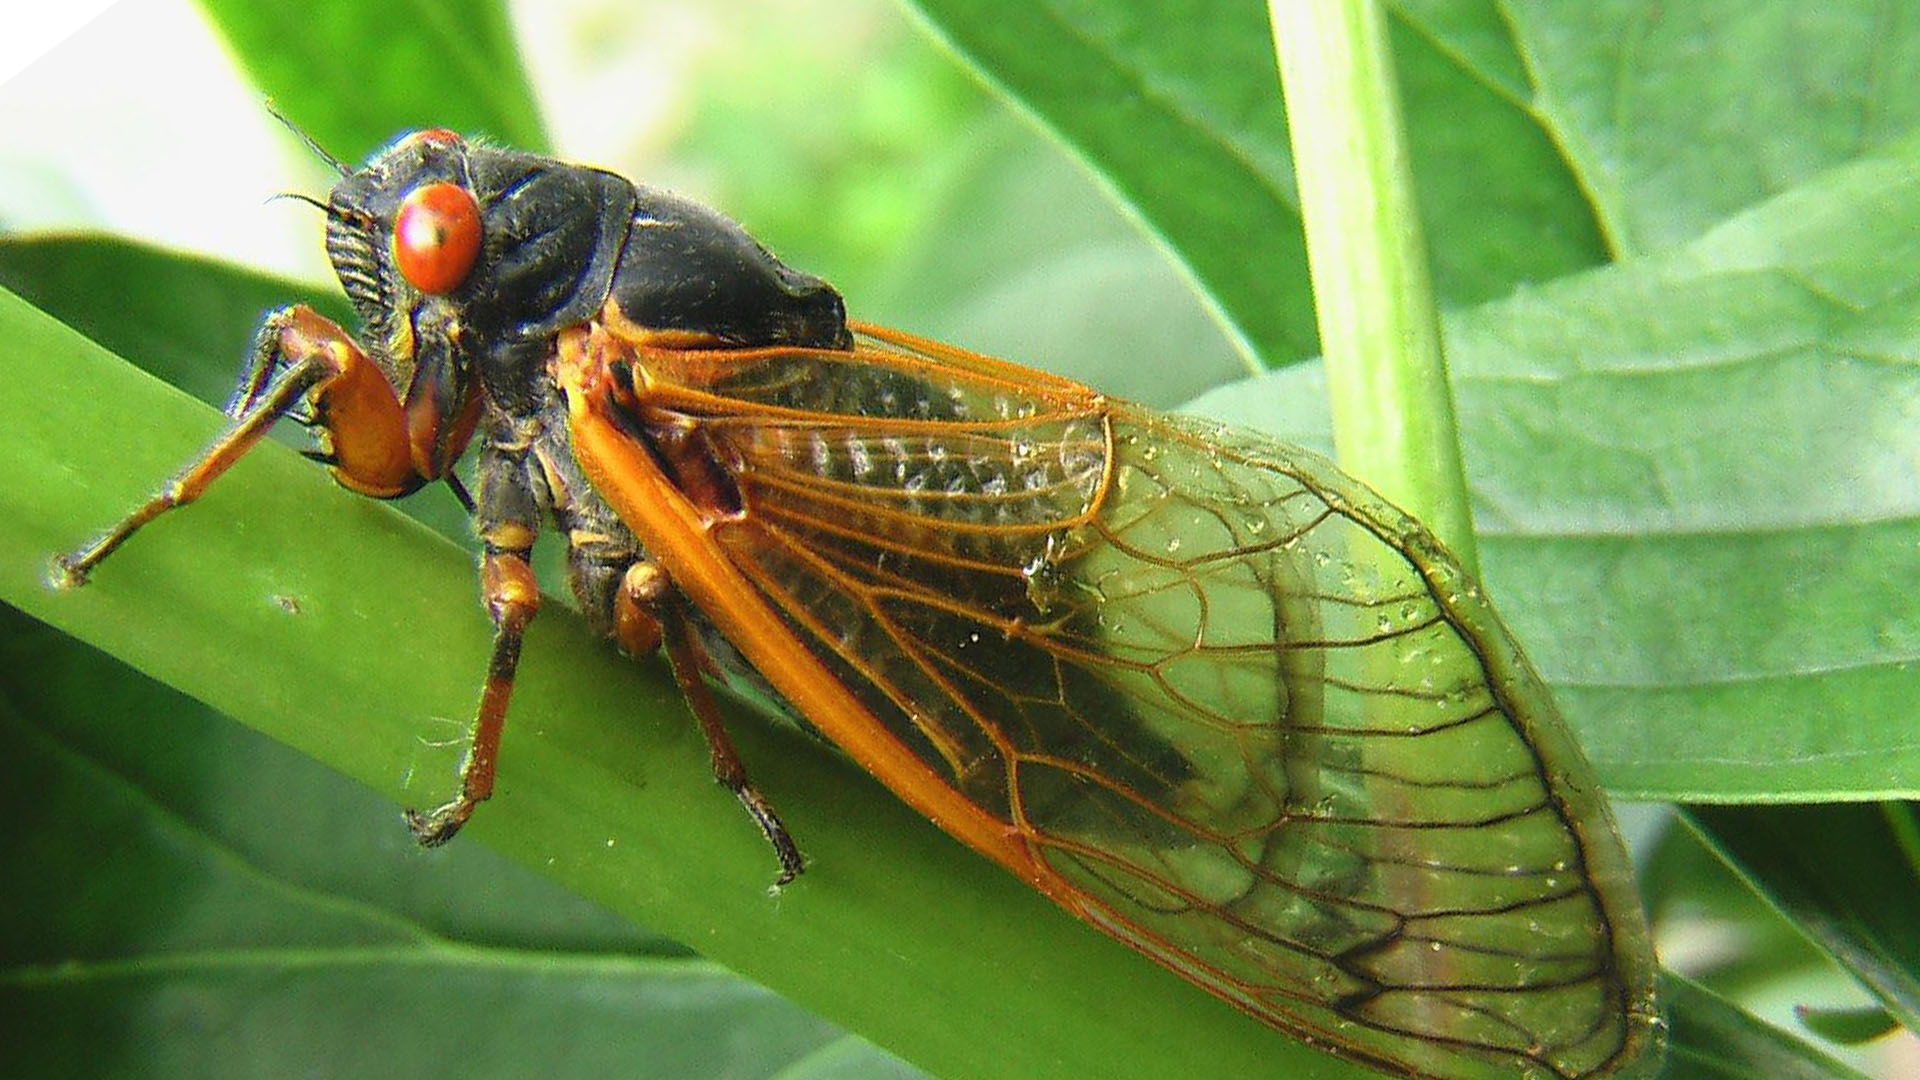 A close up of a cicada on a green plant